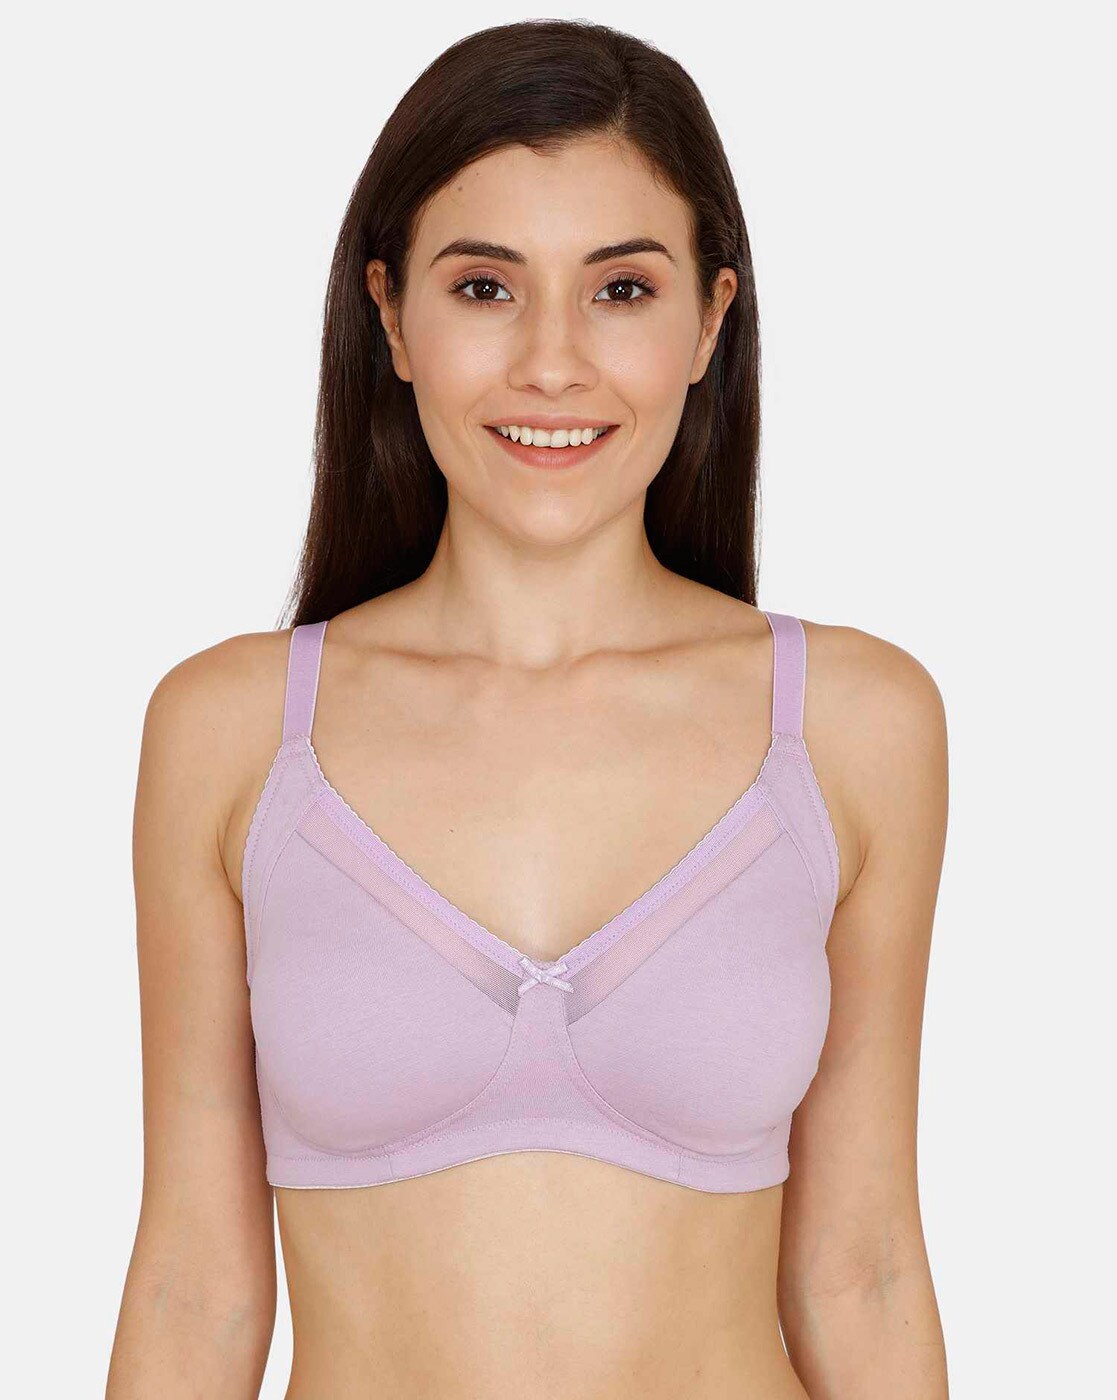 Extralife Women Sports Lightly Padded Bra - Buy Extralife Women Sports  Lightly Padded Bra Online at Best Prices in India